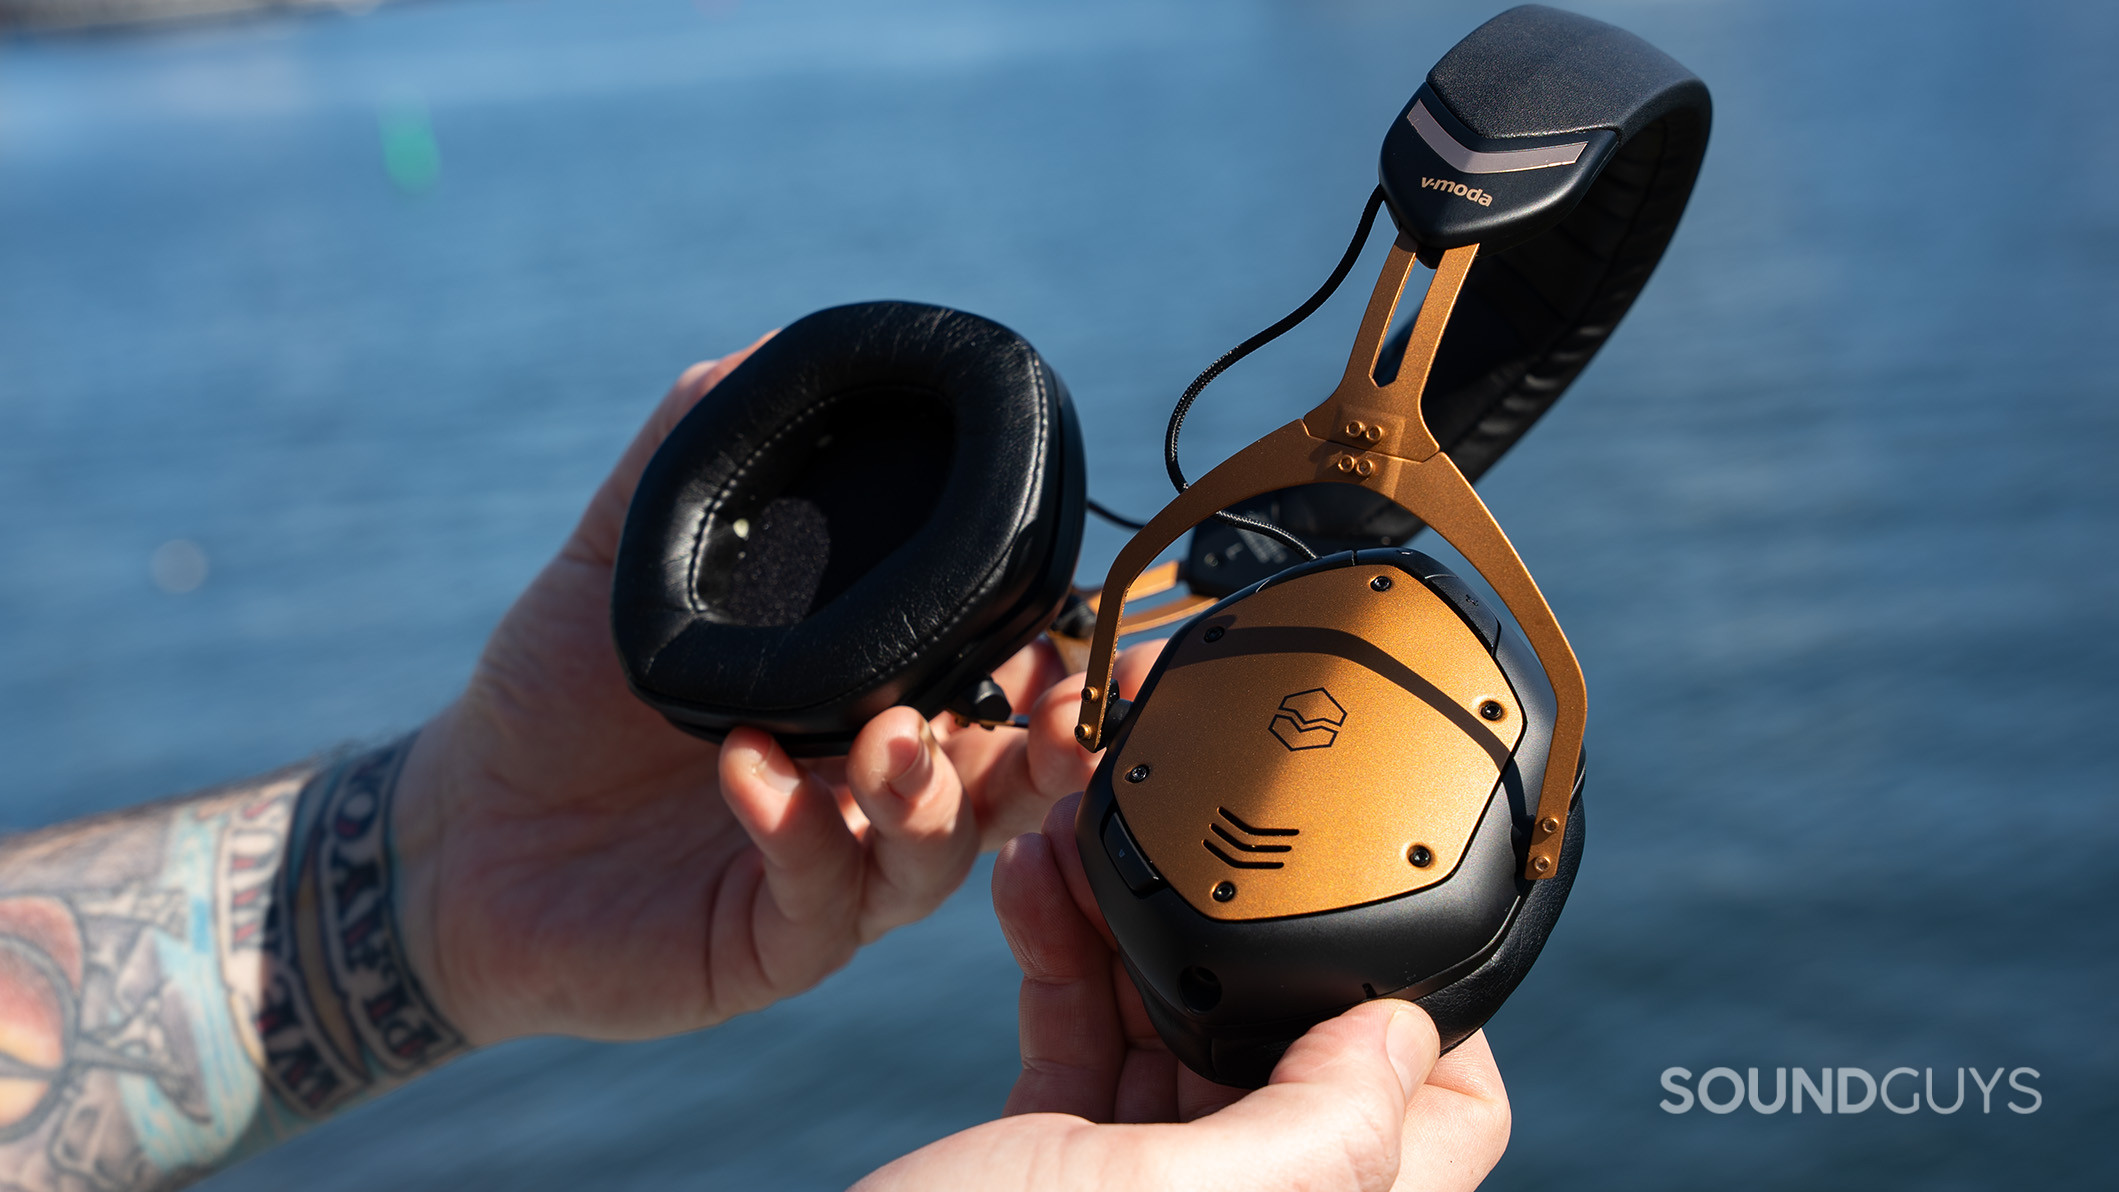 The V-MODA Crossfade 3 Wireless headphones are bent over a body of water.